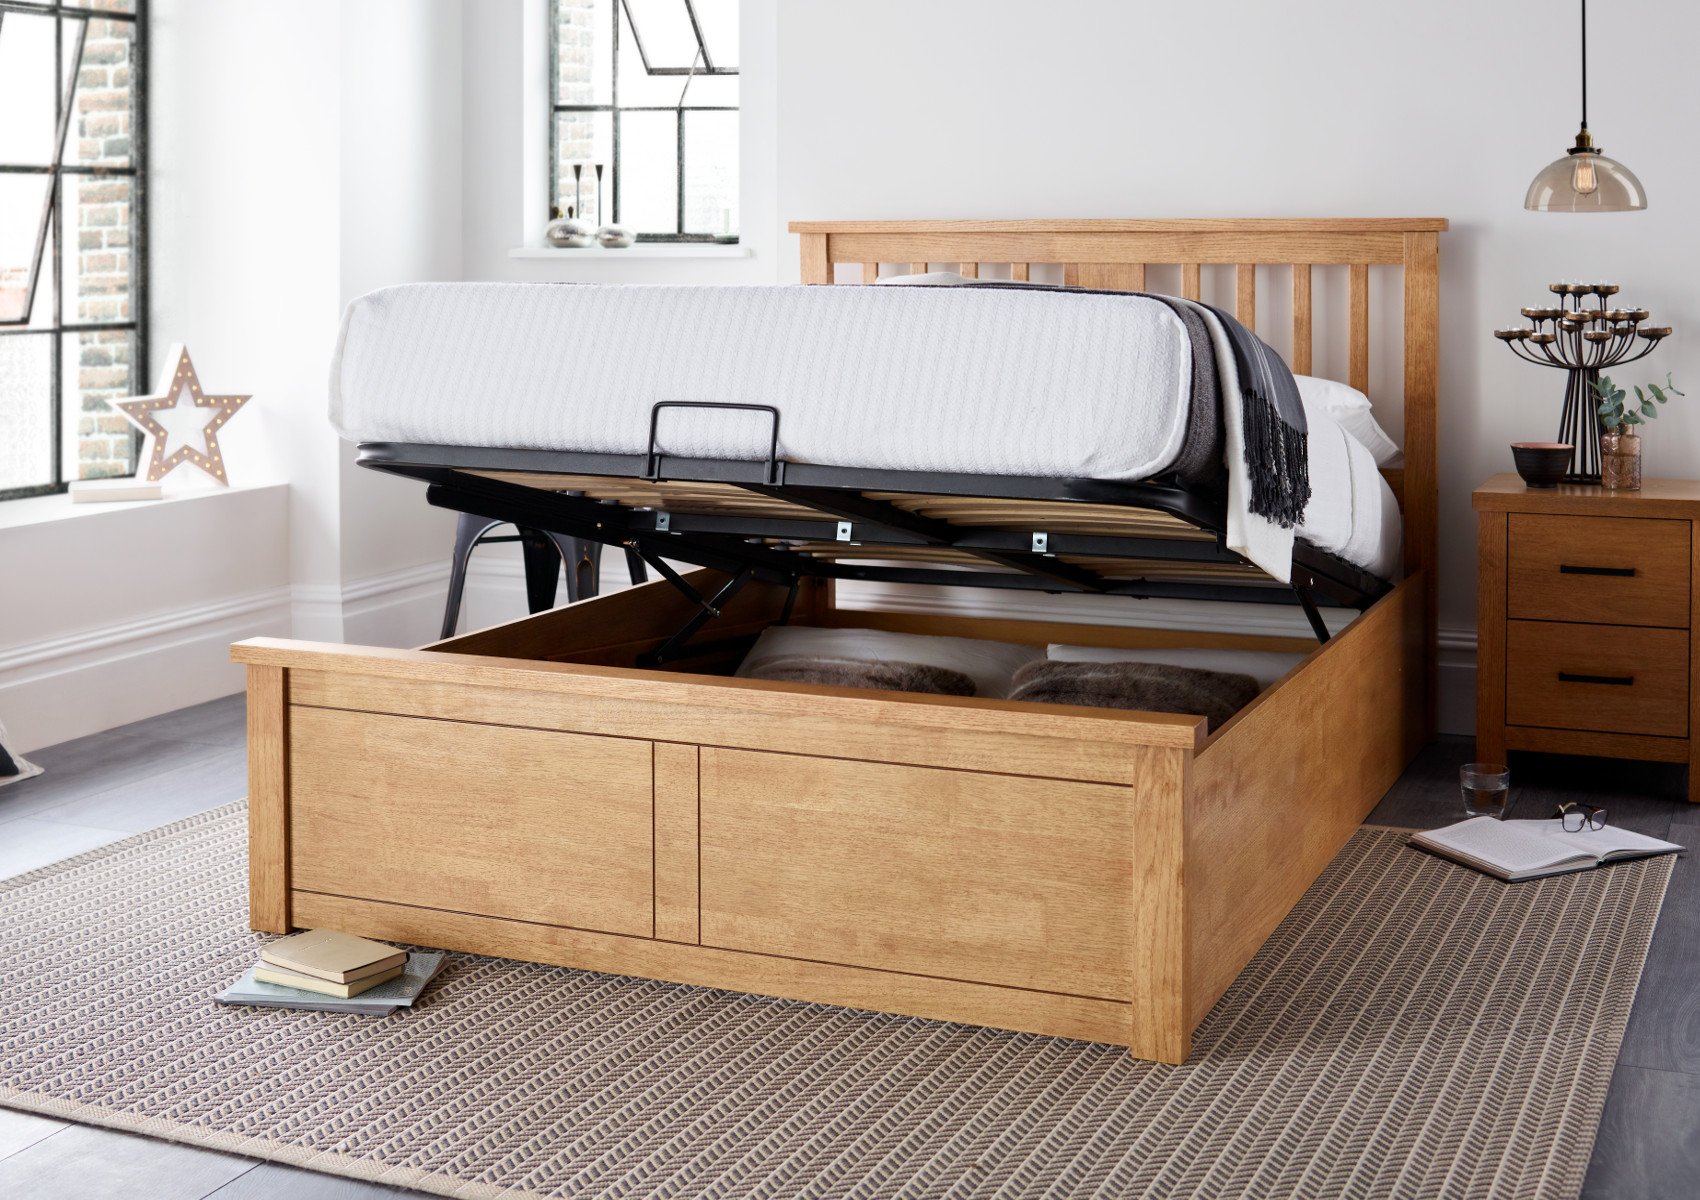 View Malmo New Oak Finish Wooden Ottoman Storage Bed Time4Sleep information